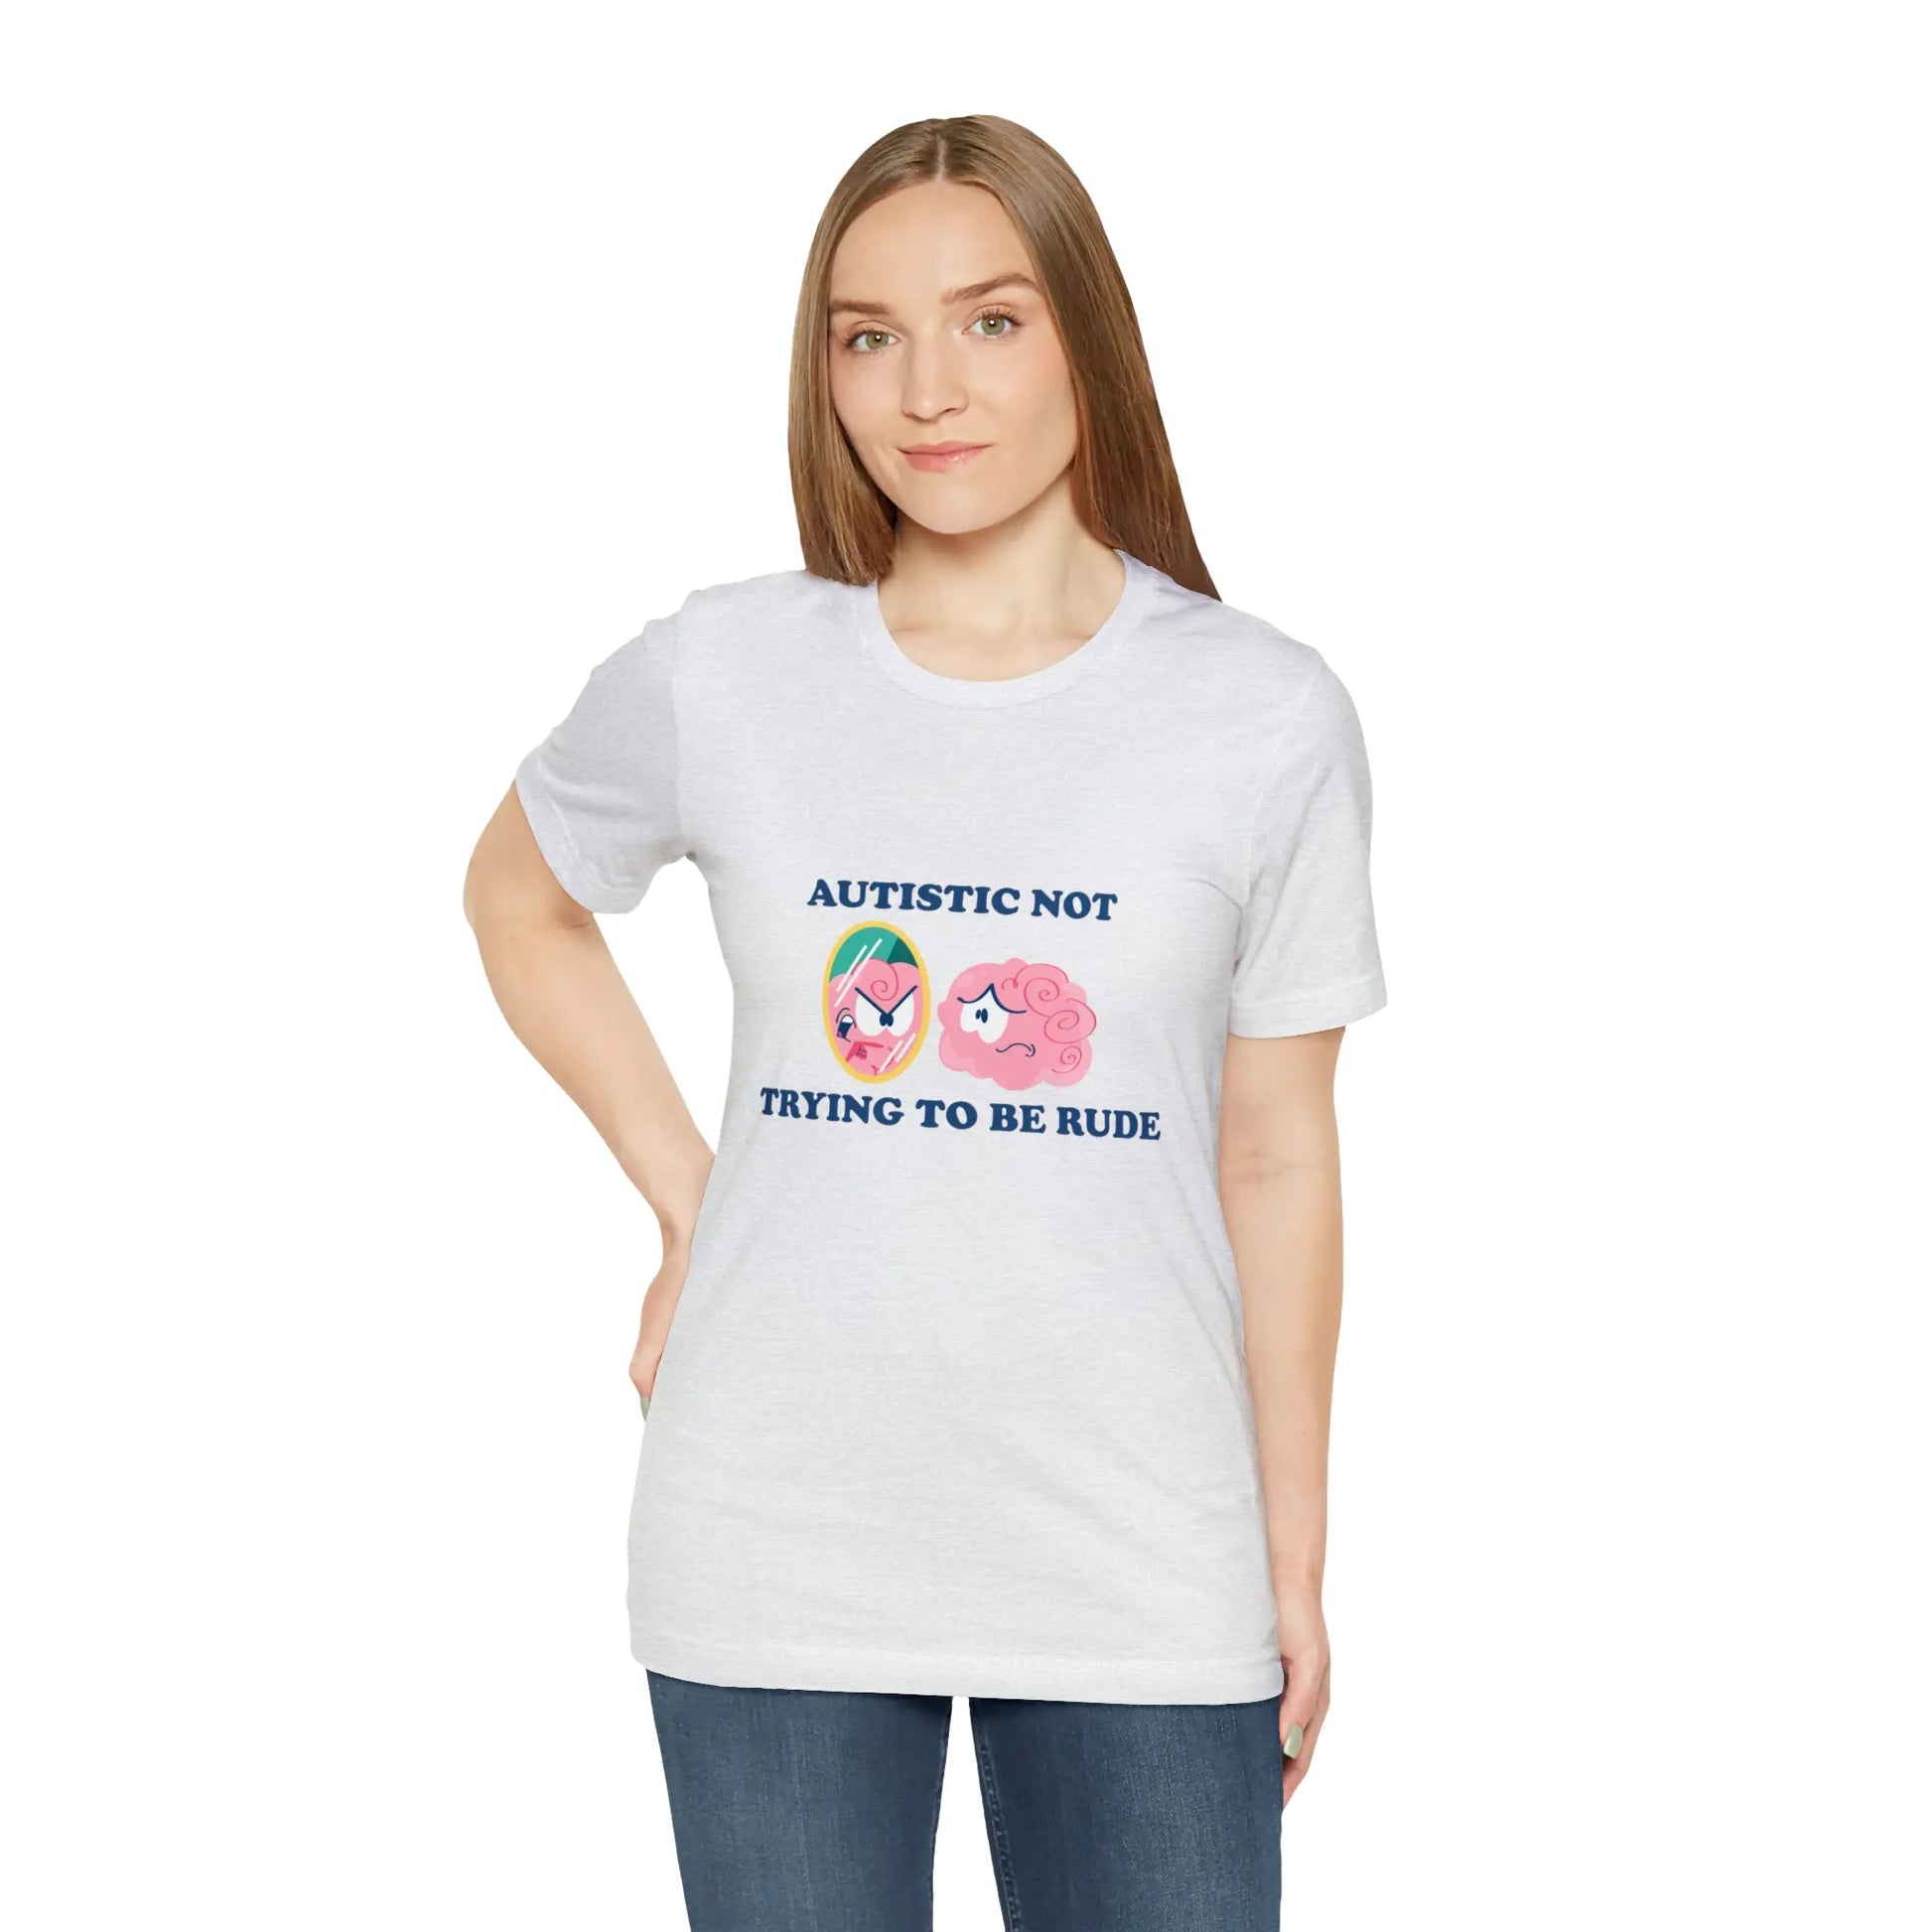 Autistic, Not Trying to be Rude T-Shirt - heyasd.com